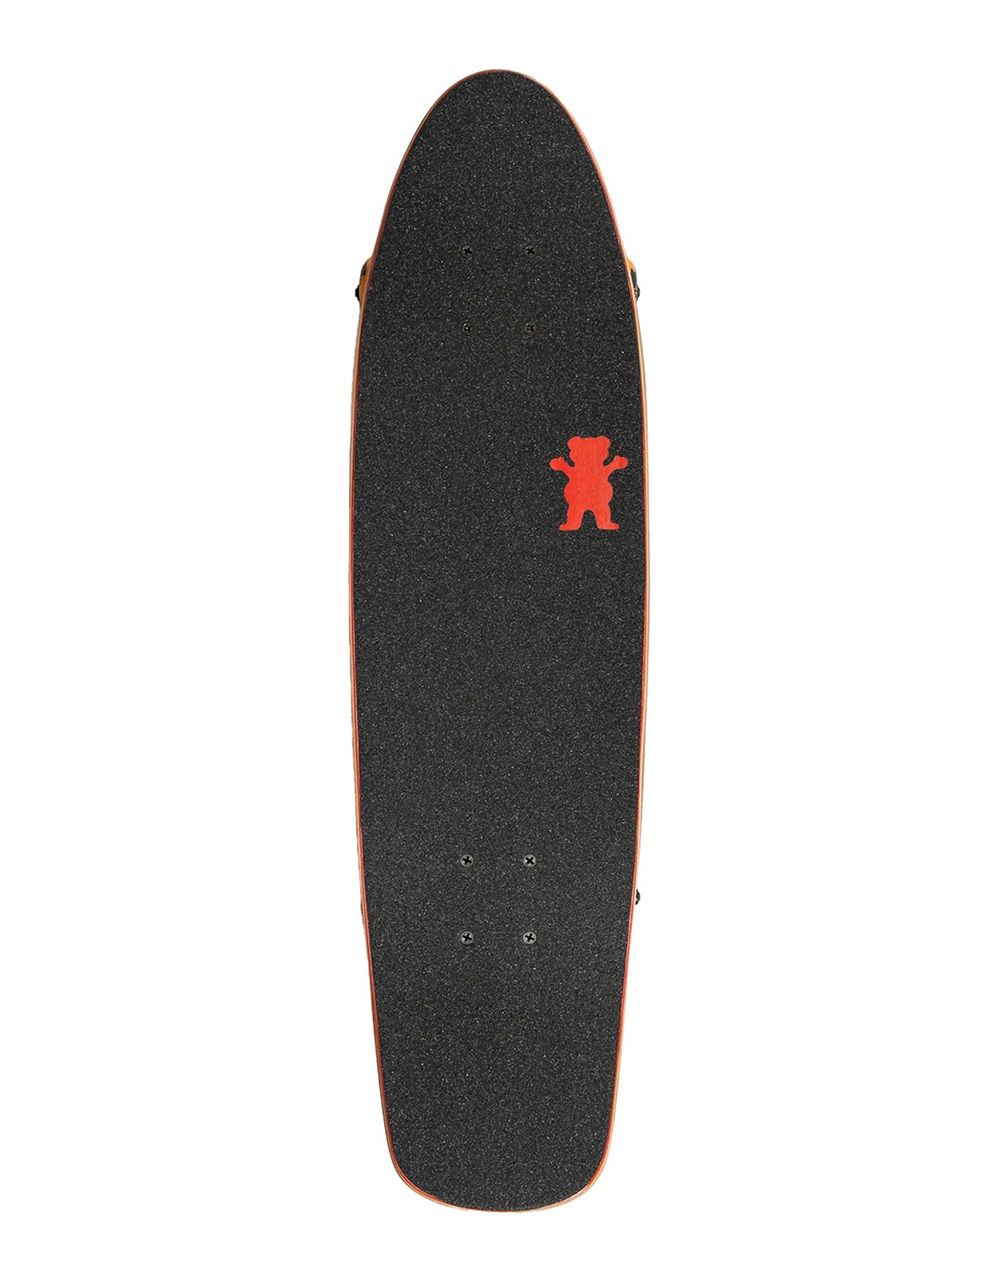 GRIZZLY 7.75" Complete Cruiser Skateboard | Tillys